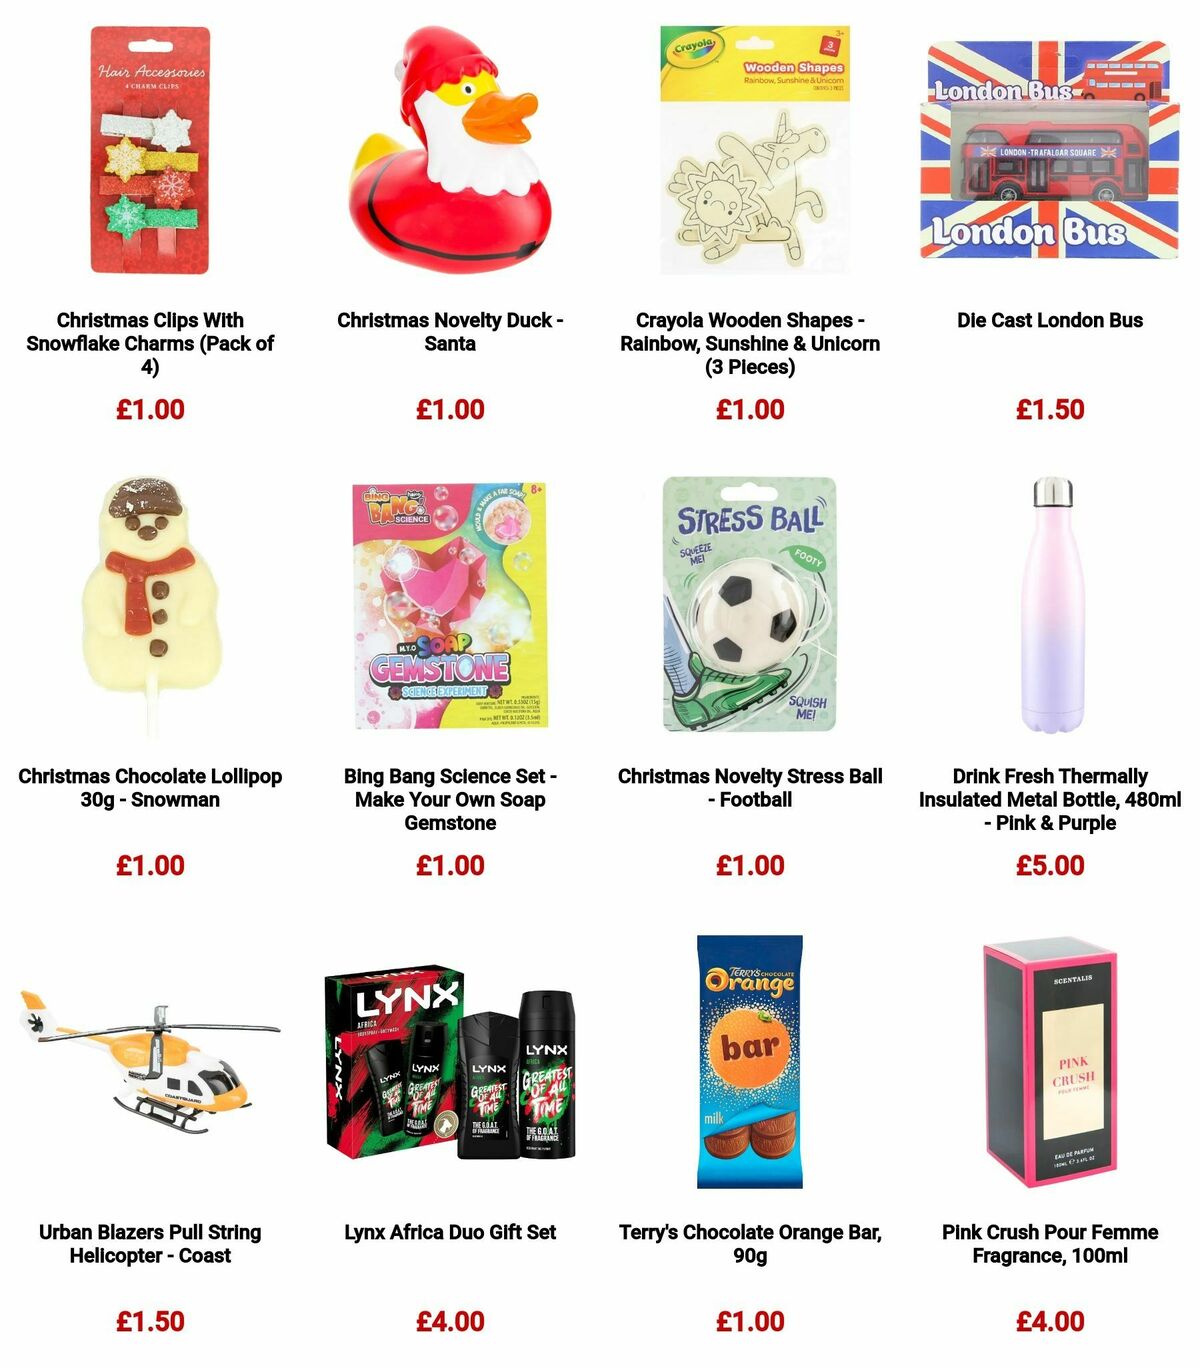 Poundland Offers from 11 December